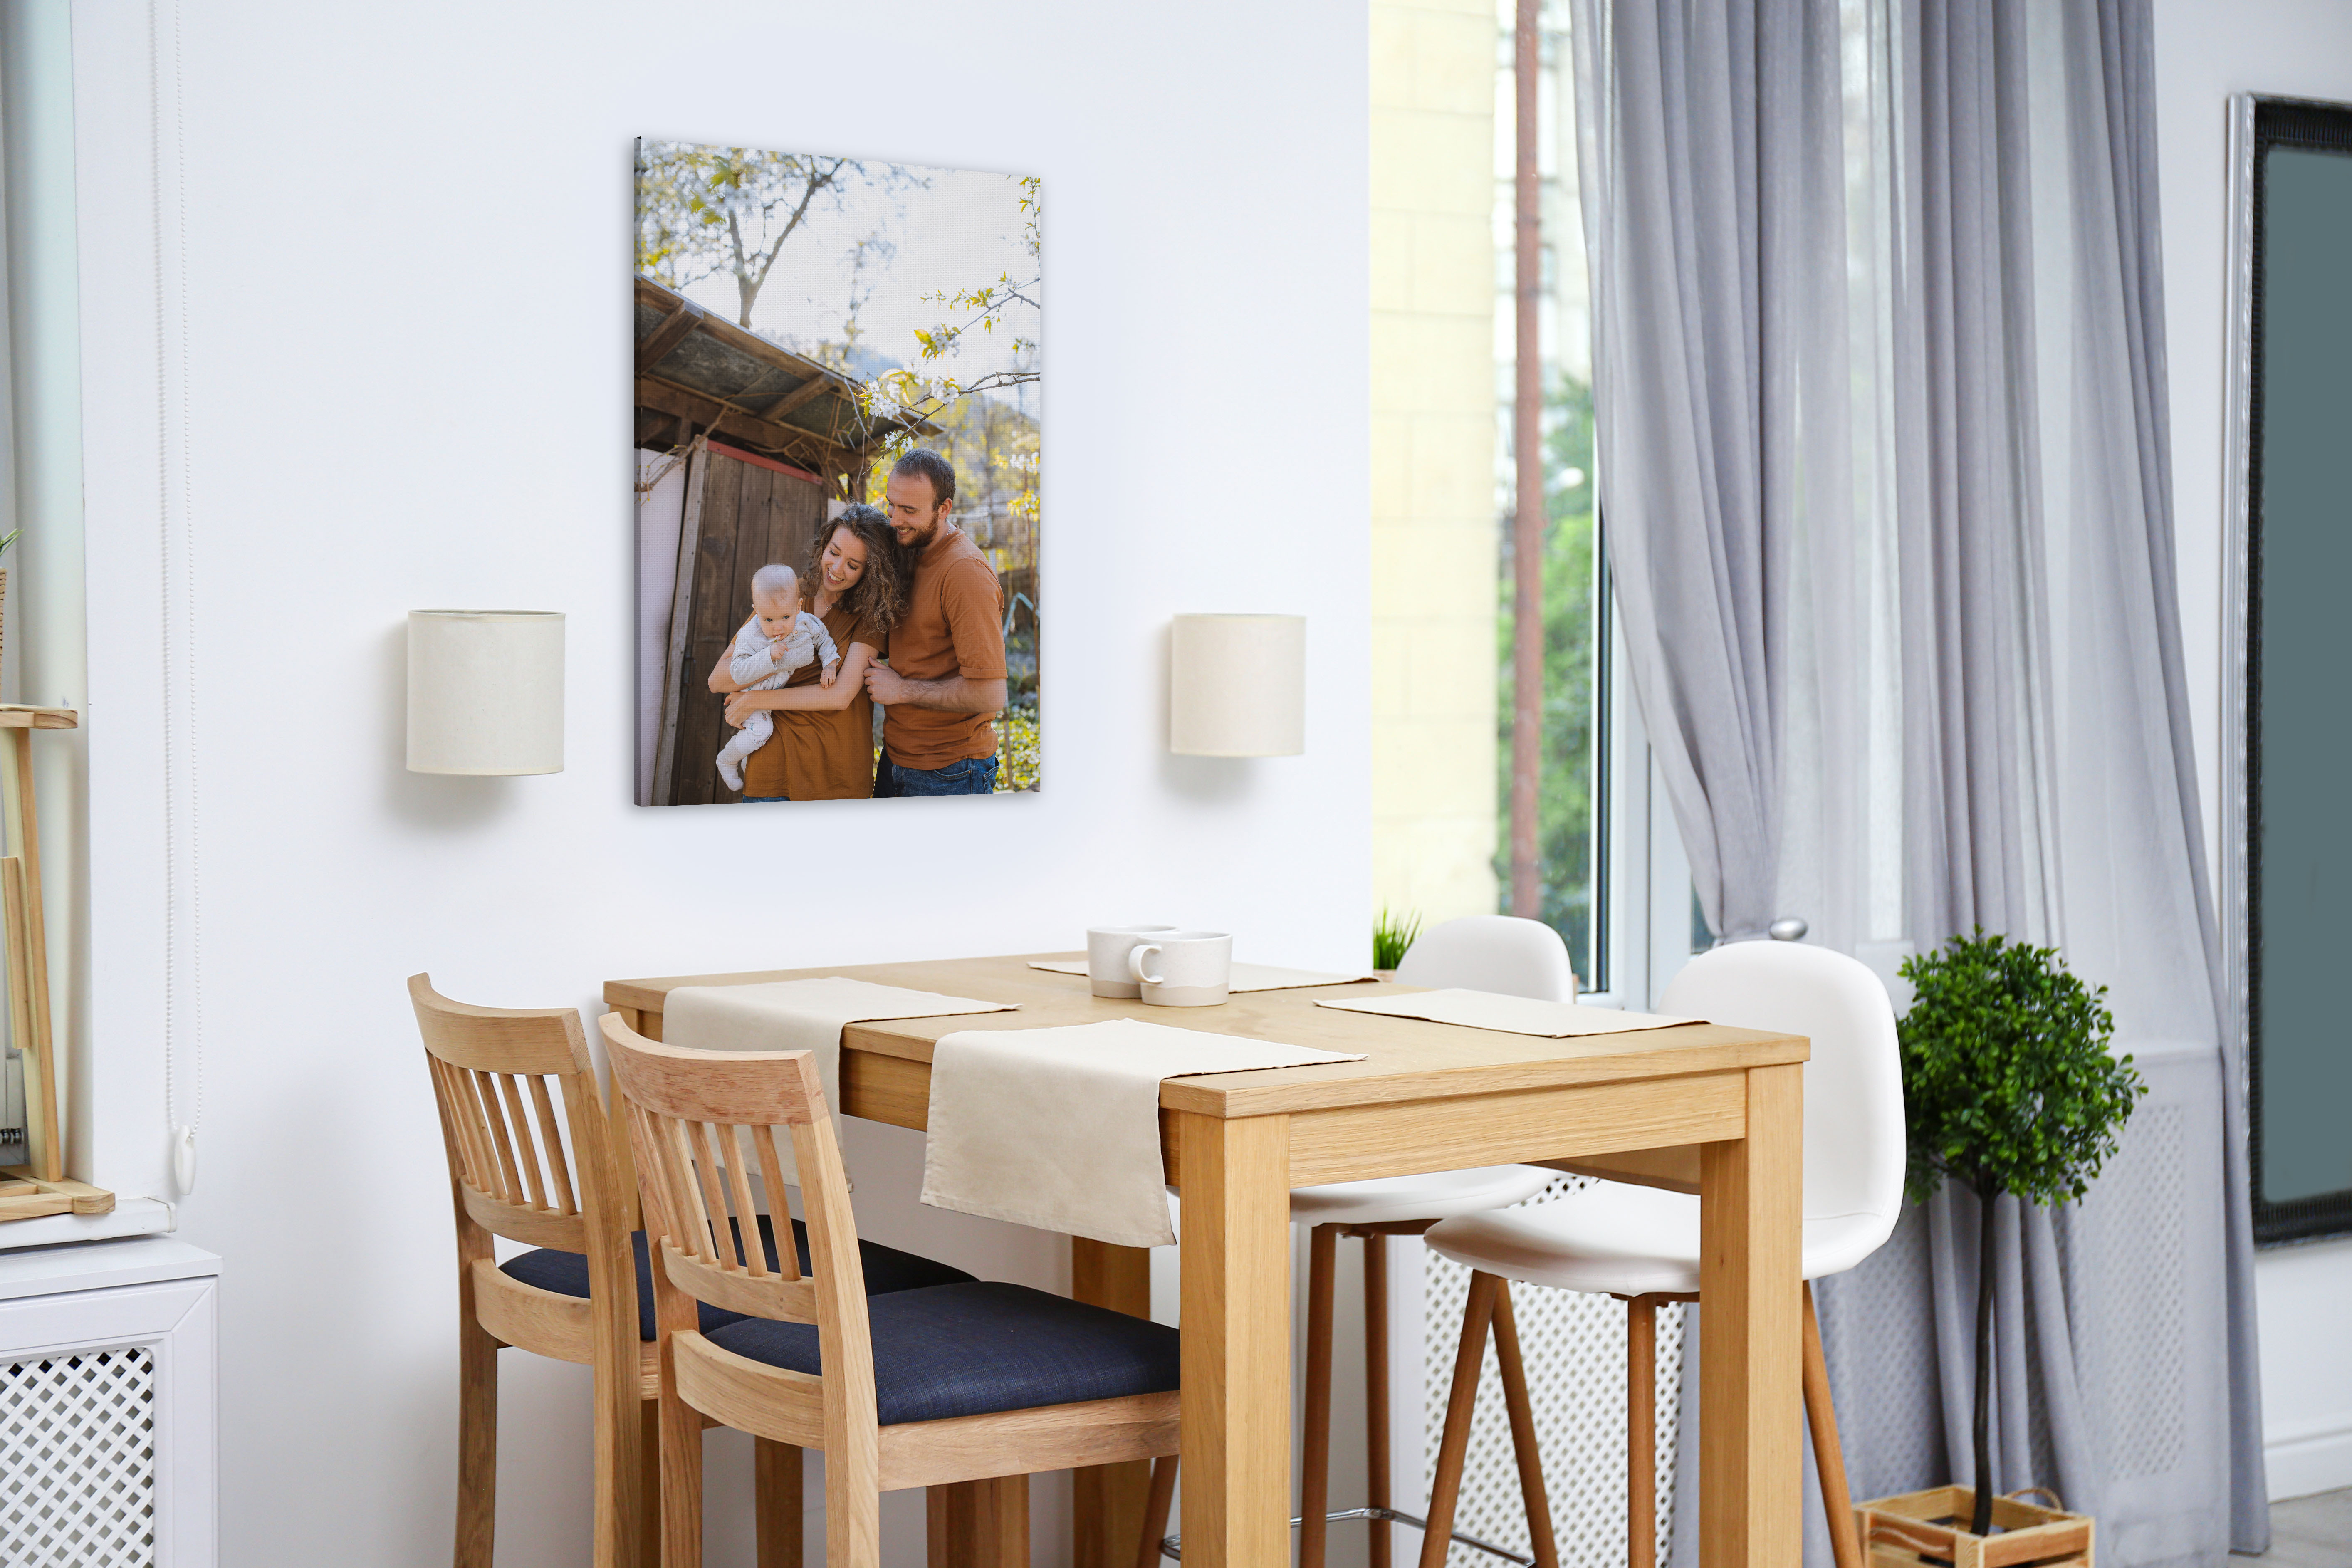 Canvas print in dining room of family